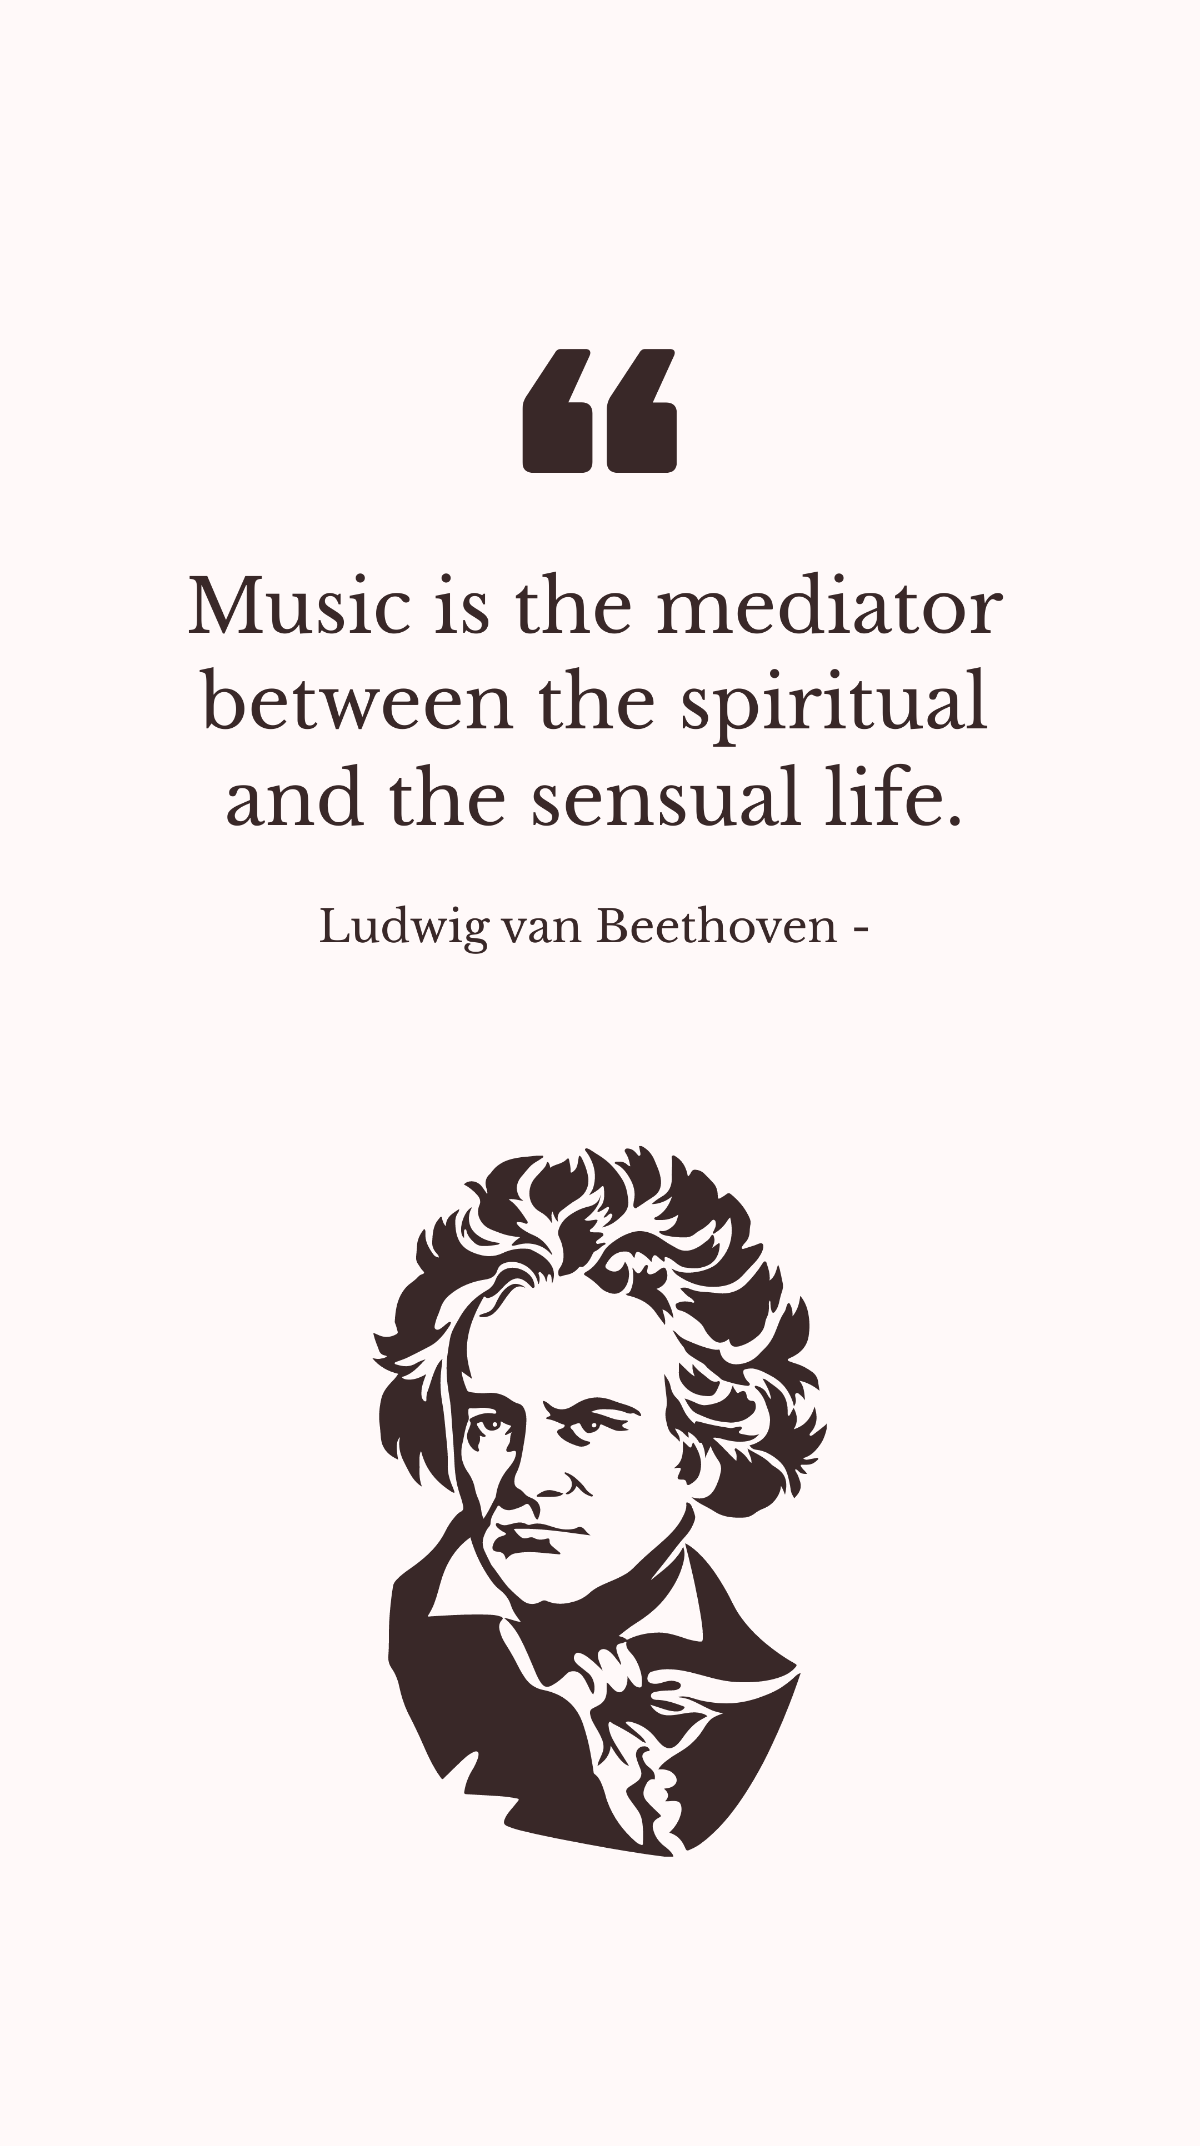 Ludwig van Beethoven - Music is the mediator between the spiritual and the sensual life.